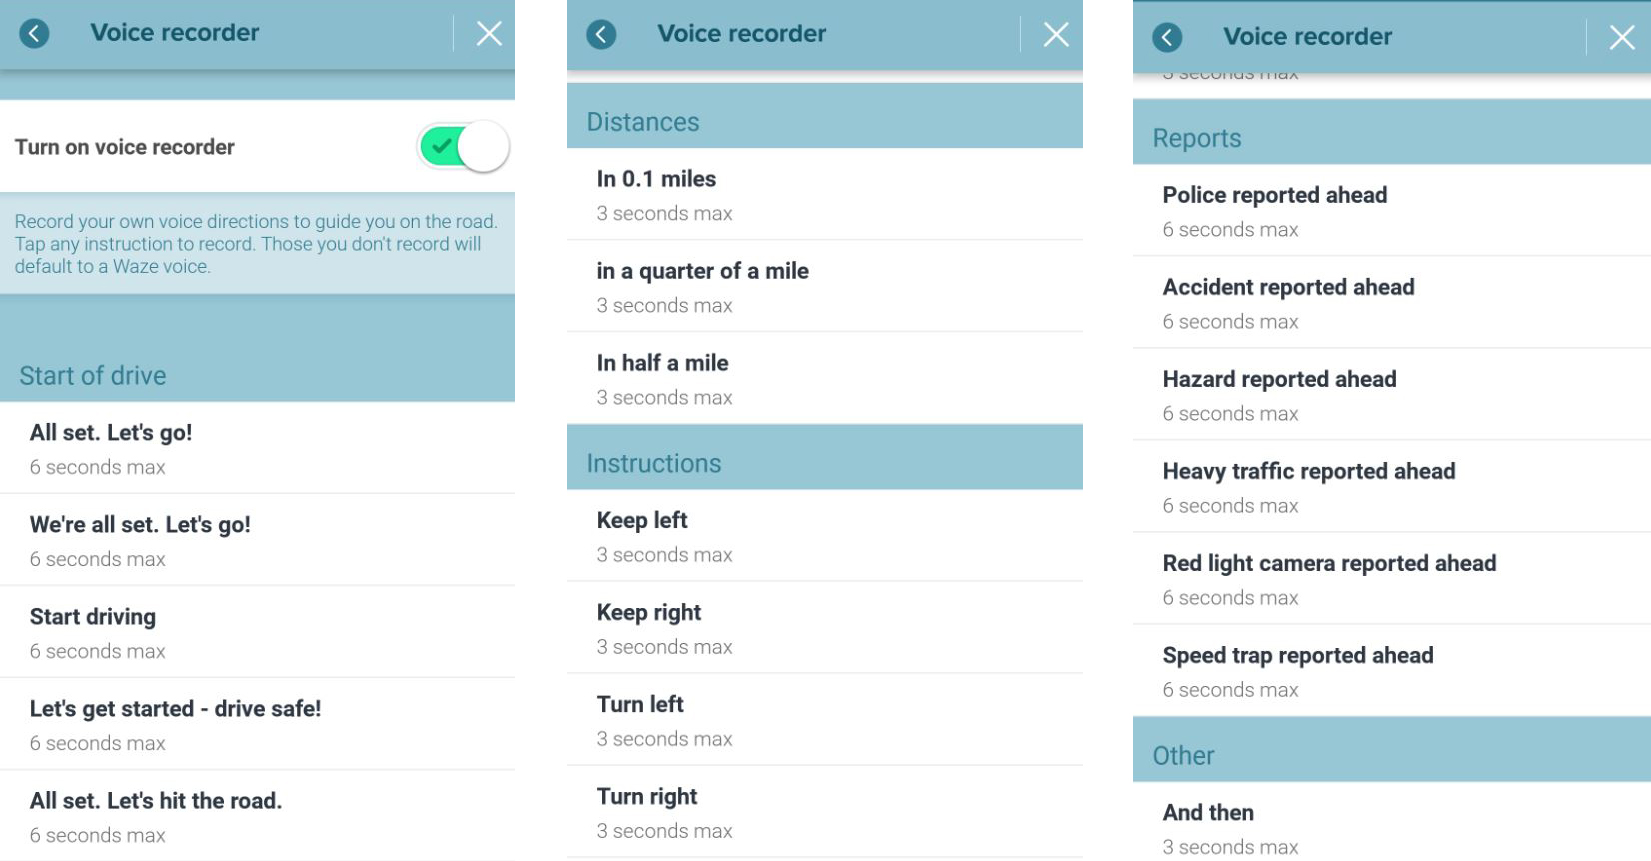 Bother Resignation City Waze now lets iOS users record their own custom voice navigation prompts |  TechCrunch